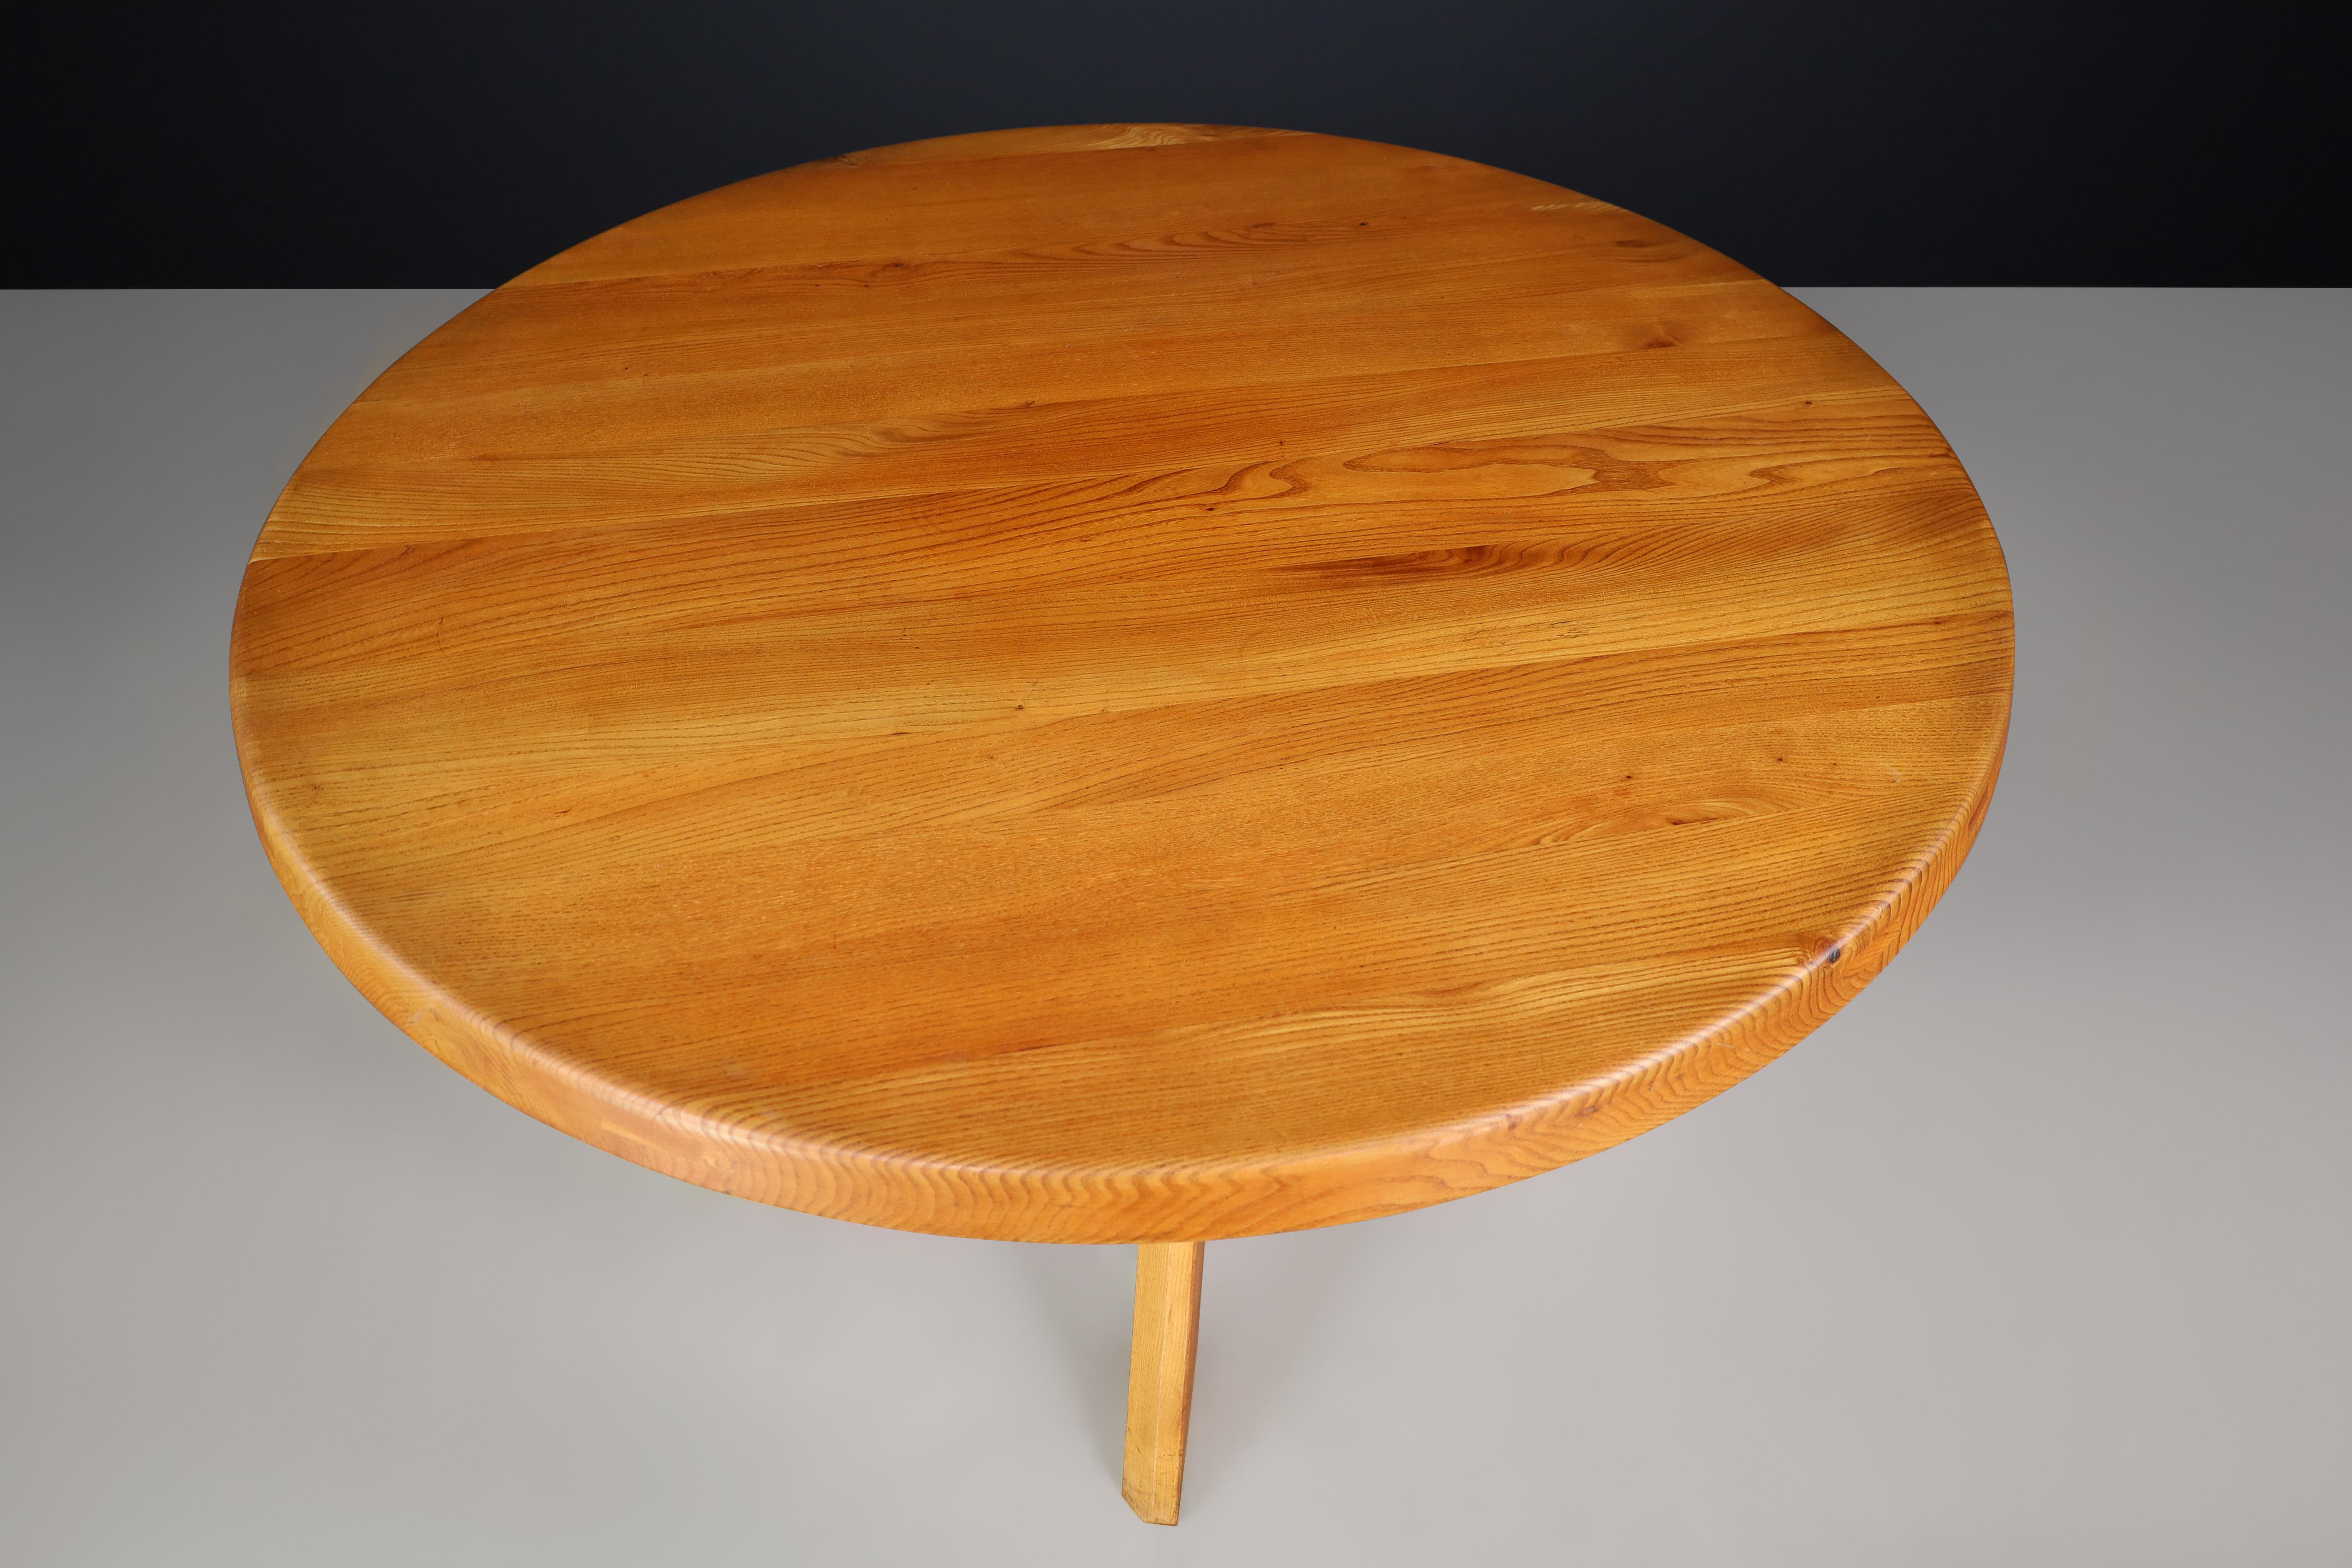 Pierre Chapo 'T21C' Sfax Round Dining Table made of Solid Elm, France 1969 For Sale 2